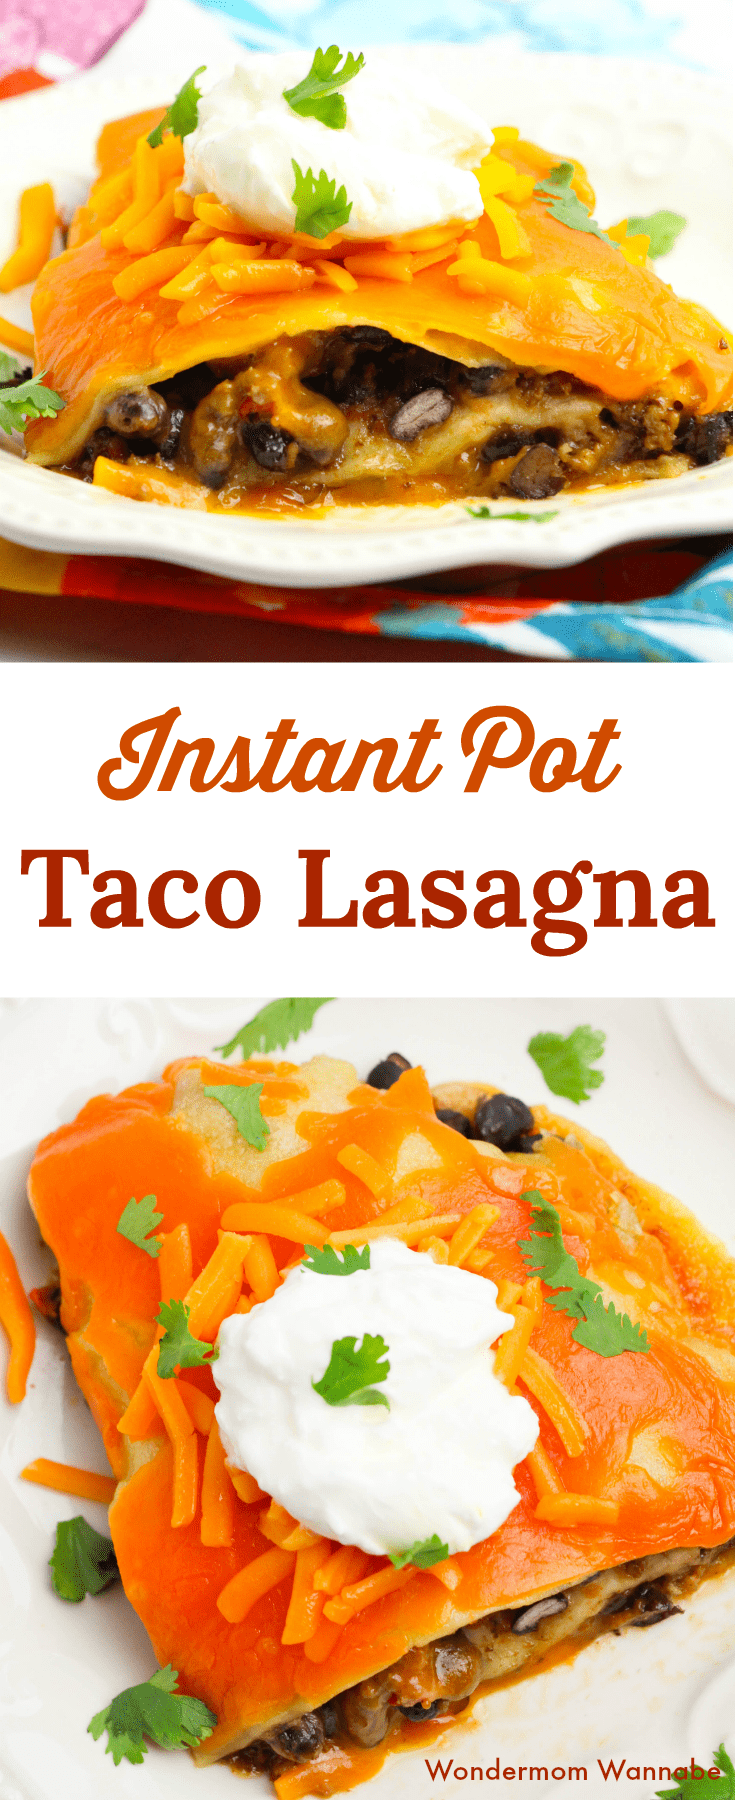 This Instant Pot Taco Lasagna has all the great flavors of tacos layered lasagna-style. It's an easy way to switch up Taco Tuesdays! #instantpot #pressurecooker #tacos #lasagna via @wondermomwannab